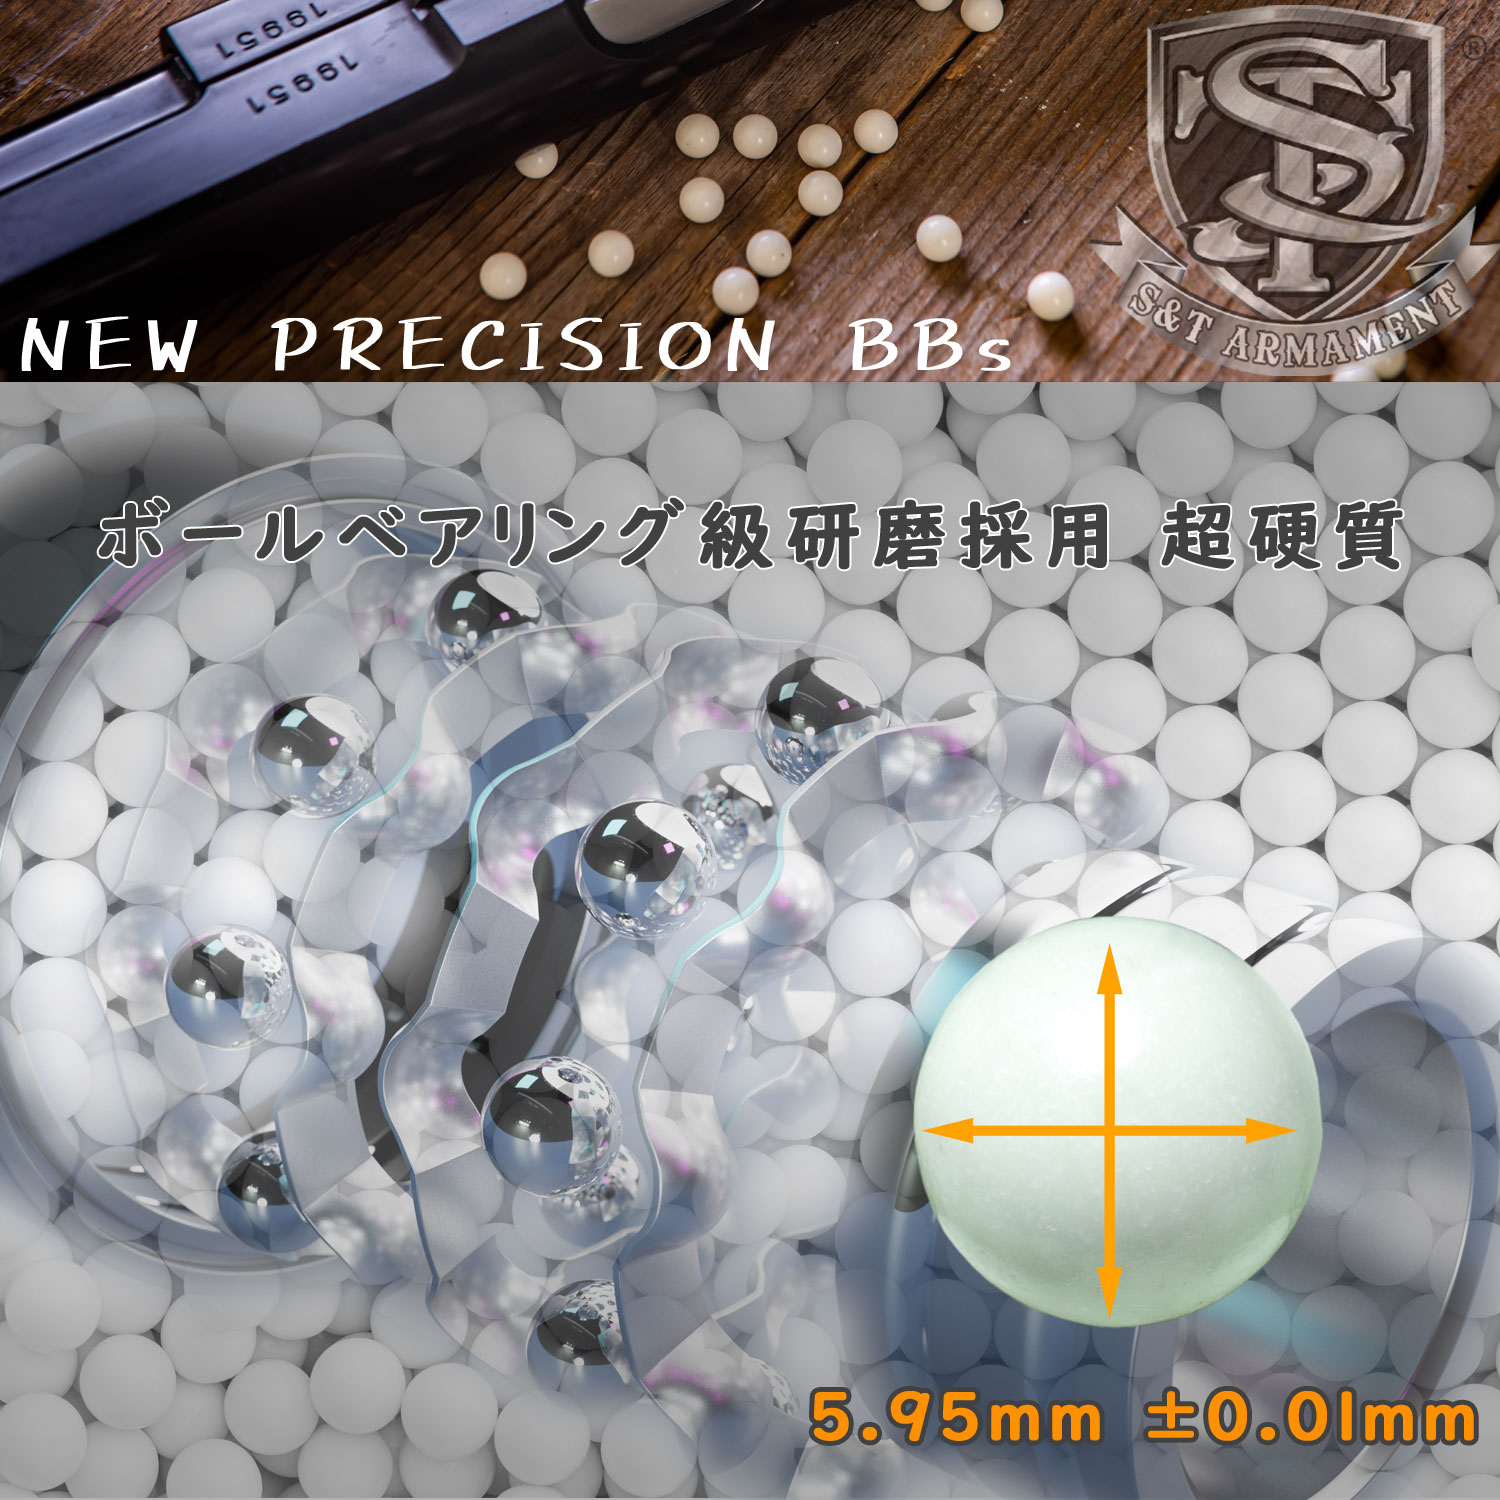 S&amp;T NEW PRECISION 6mm Vaio BB.(BIO) 0.25g approximately 4000 departure 